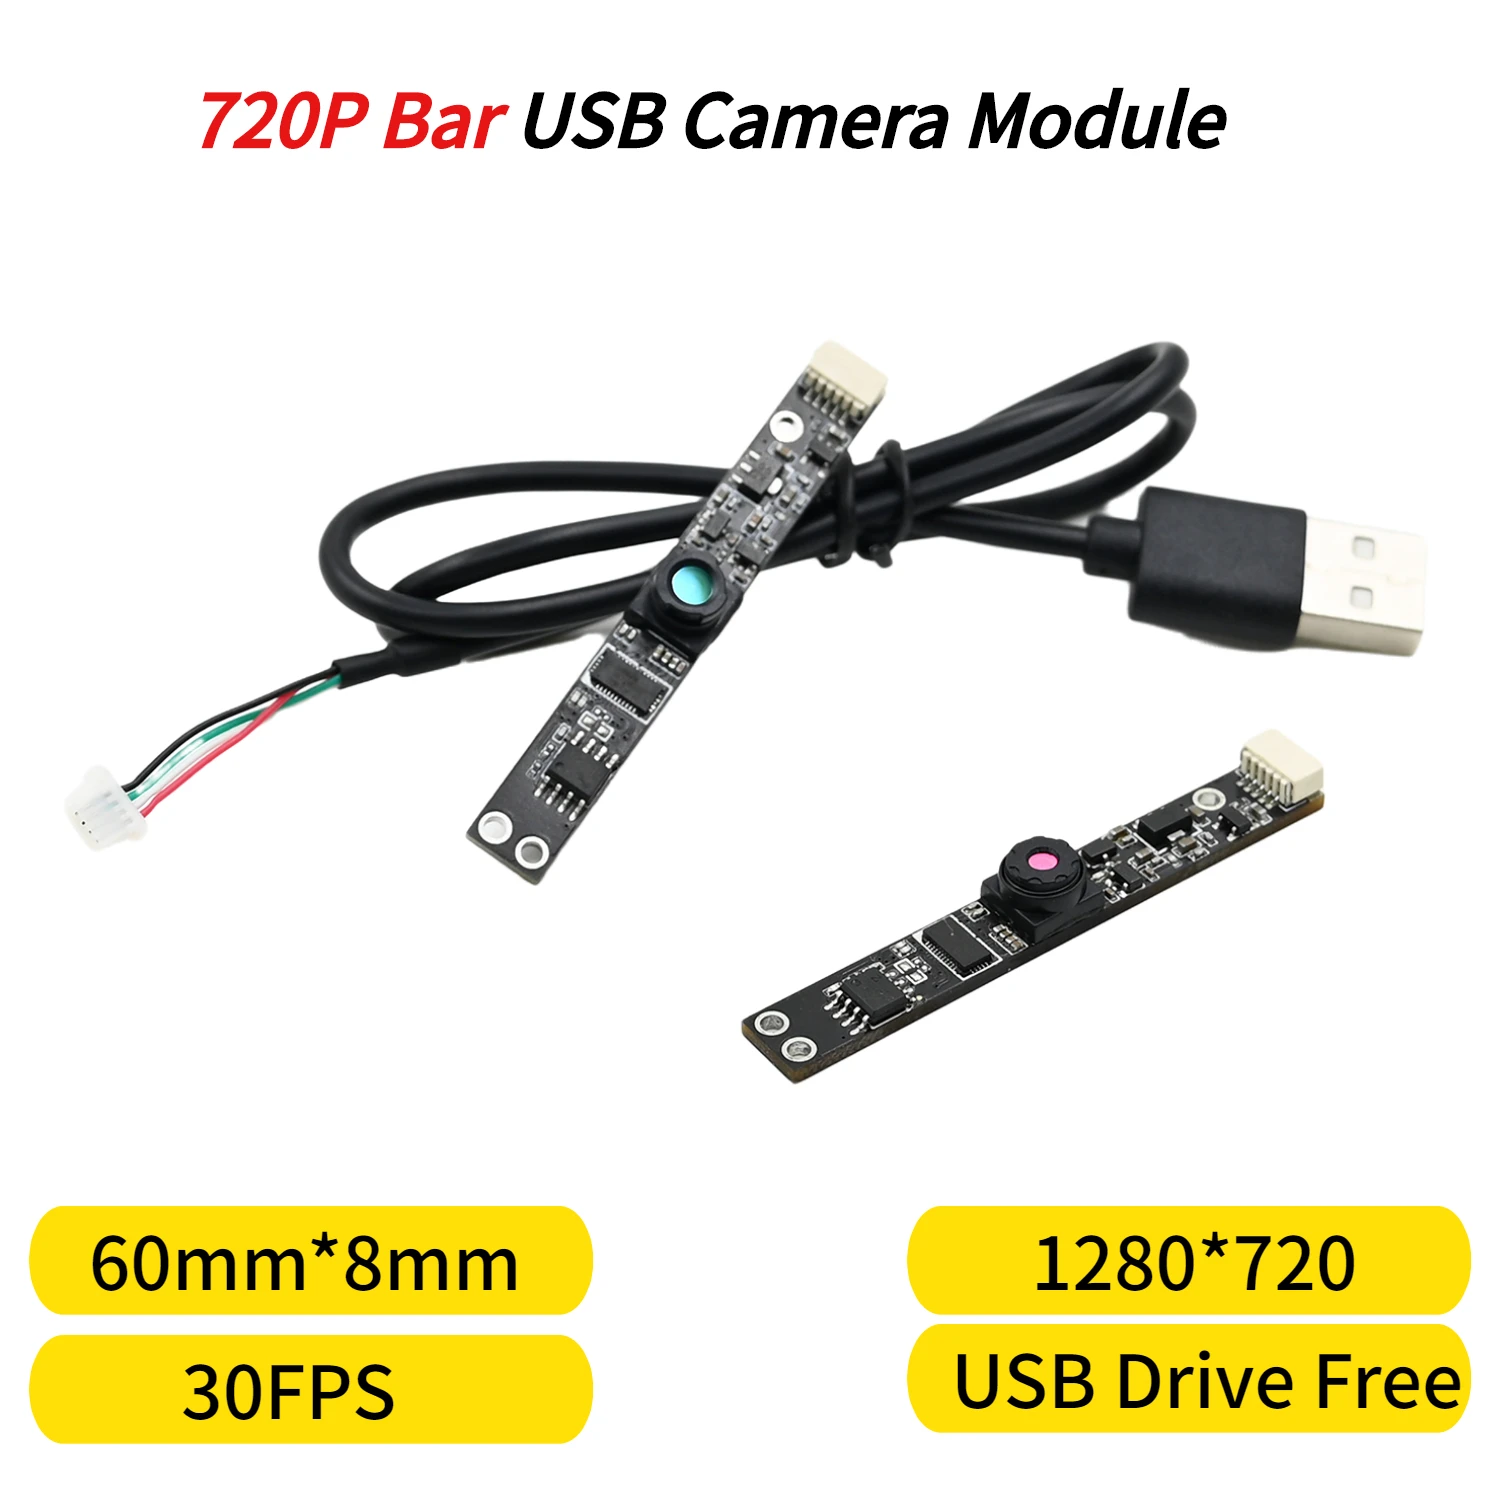 

Bar Camera Module 1MP 720P USB Webcam 73 Or 120 Degree Wide Angle SP1405 Fixed Focus Free Drive For Laptop Security Monitoring